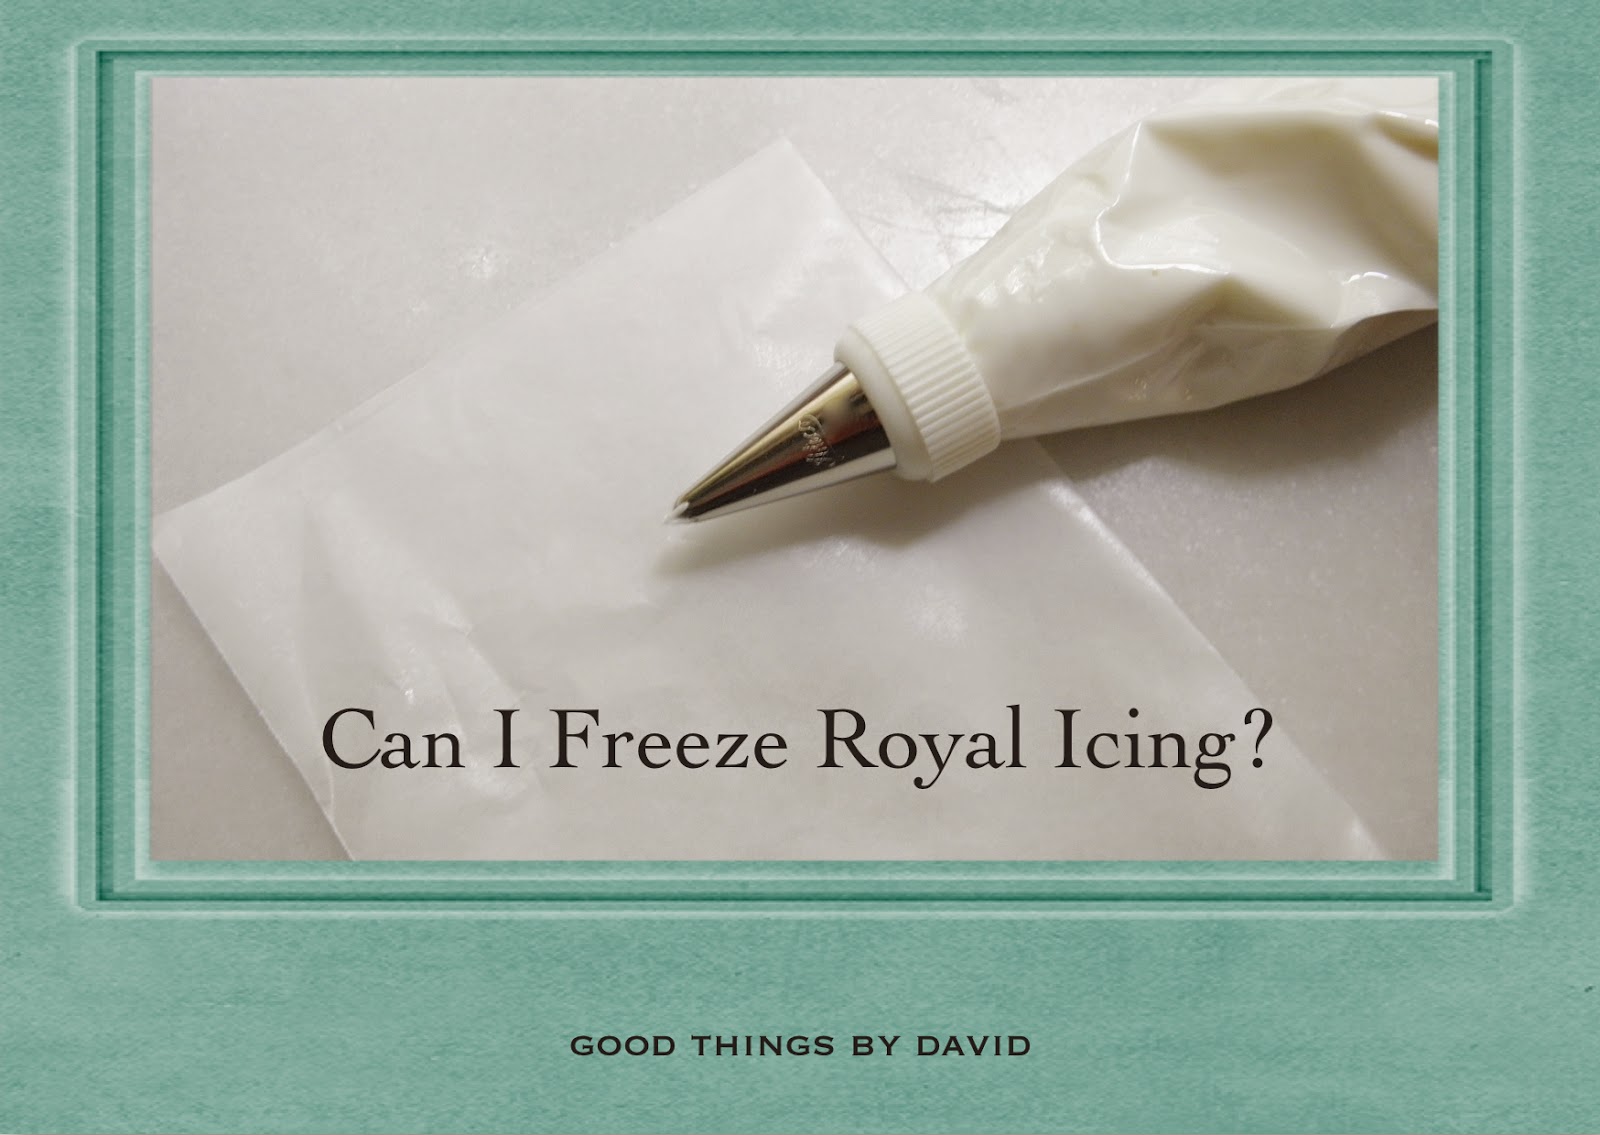 so-you-can-freeze-royal-iced-cookies-cakecentral